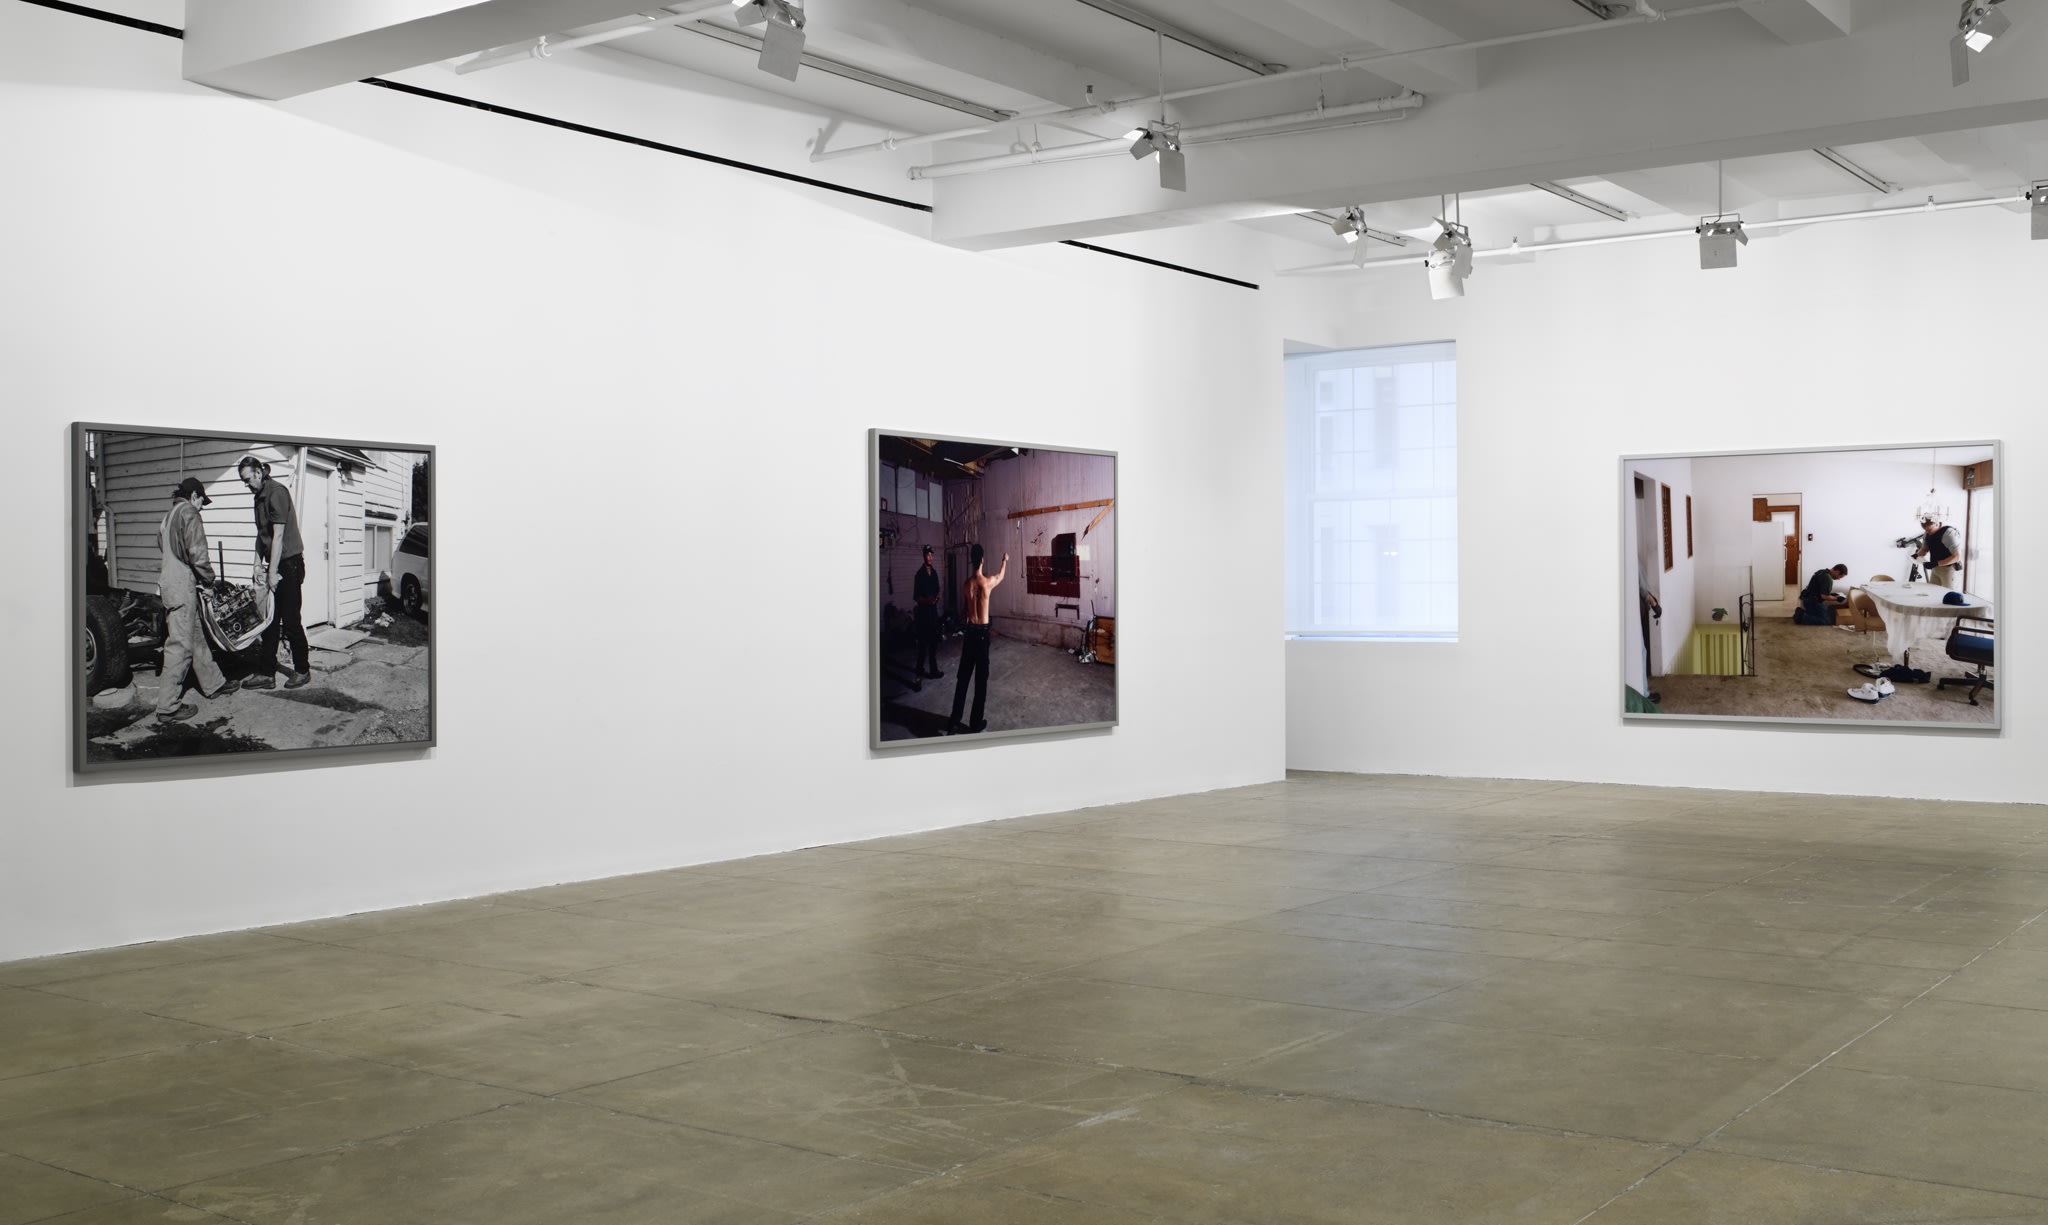 3 large, framed photographs of people involved in various activities hang in the corner of a white room. There is a window in the middle. 